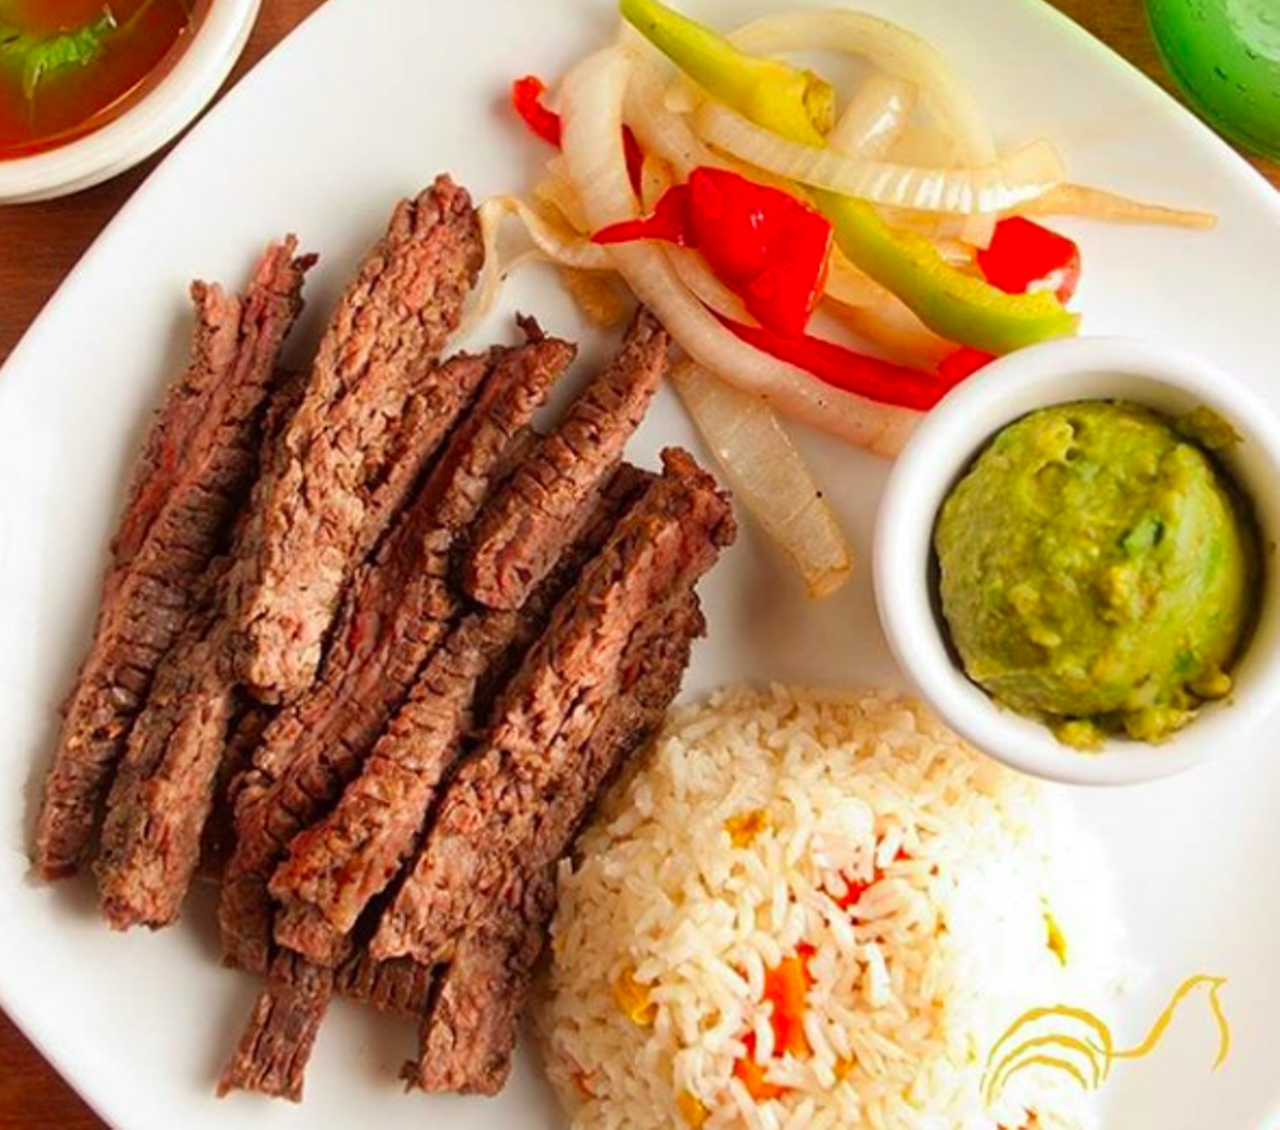 La Cantera
Palenque Grill
15900 La Cantera Parkway, Suite 25100, (210) 592-9534, palenquegrill.com
Palenque Grill offers family-friendly dining without sacrificing any flavor on the menu. Even your abuelita would put her stamp of approval on this popular Mexican eatery.
palenque.grill / Instagram